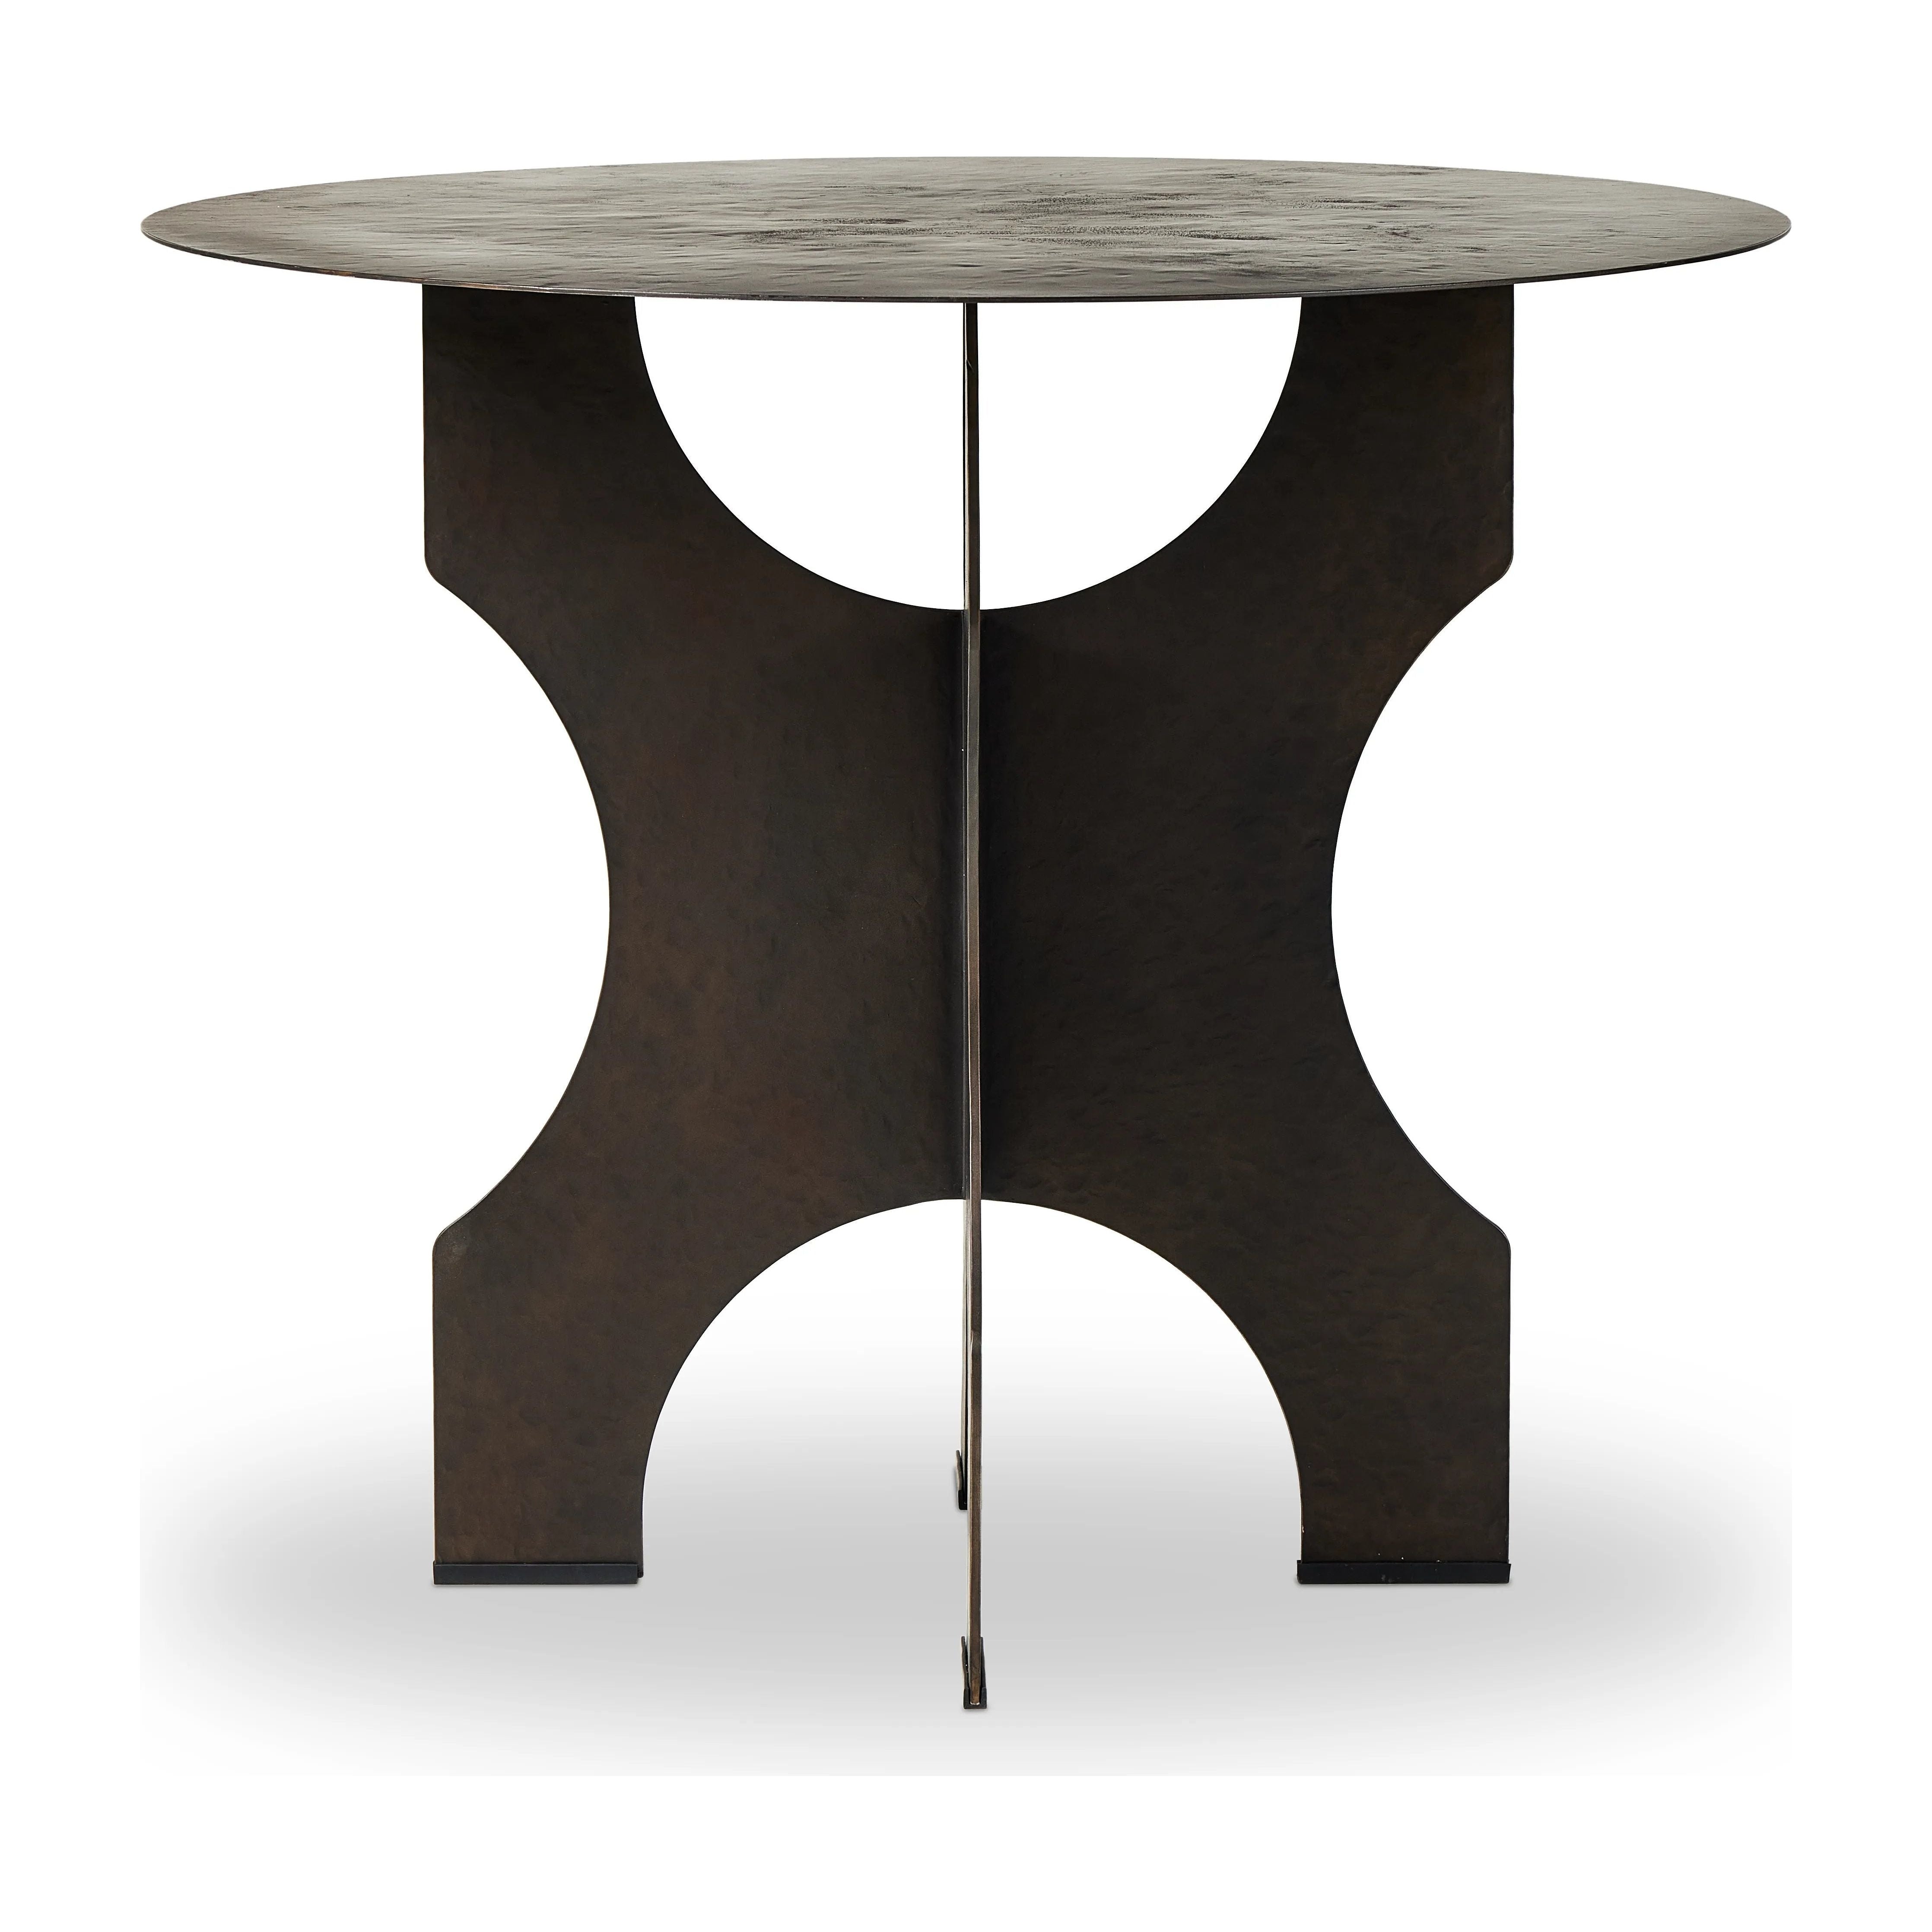 By the makers at Van Thiel, known for their antique-inspired pieces and hand-applied finishes. Solid iron with a textured bronze finish forms this unique, structured end table with industrial vibes.Collection: Van Thie Amethyst Home provides interior design, new home construction design consulting, vintage area rugs, and lighting in the Newport Beach metro area.